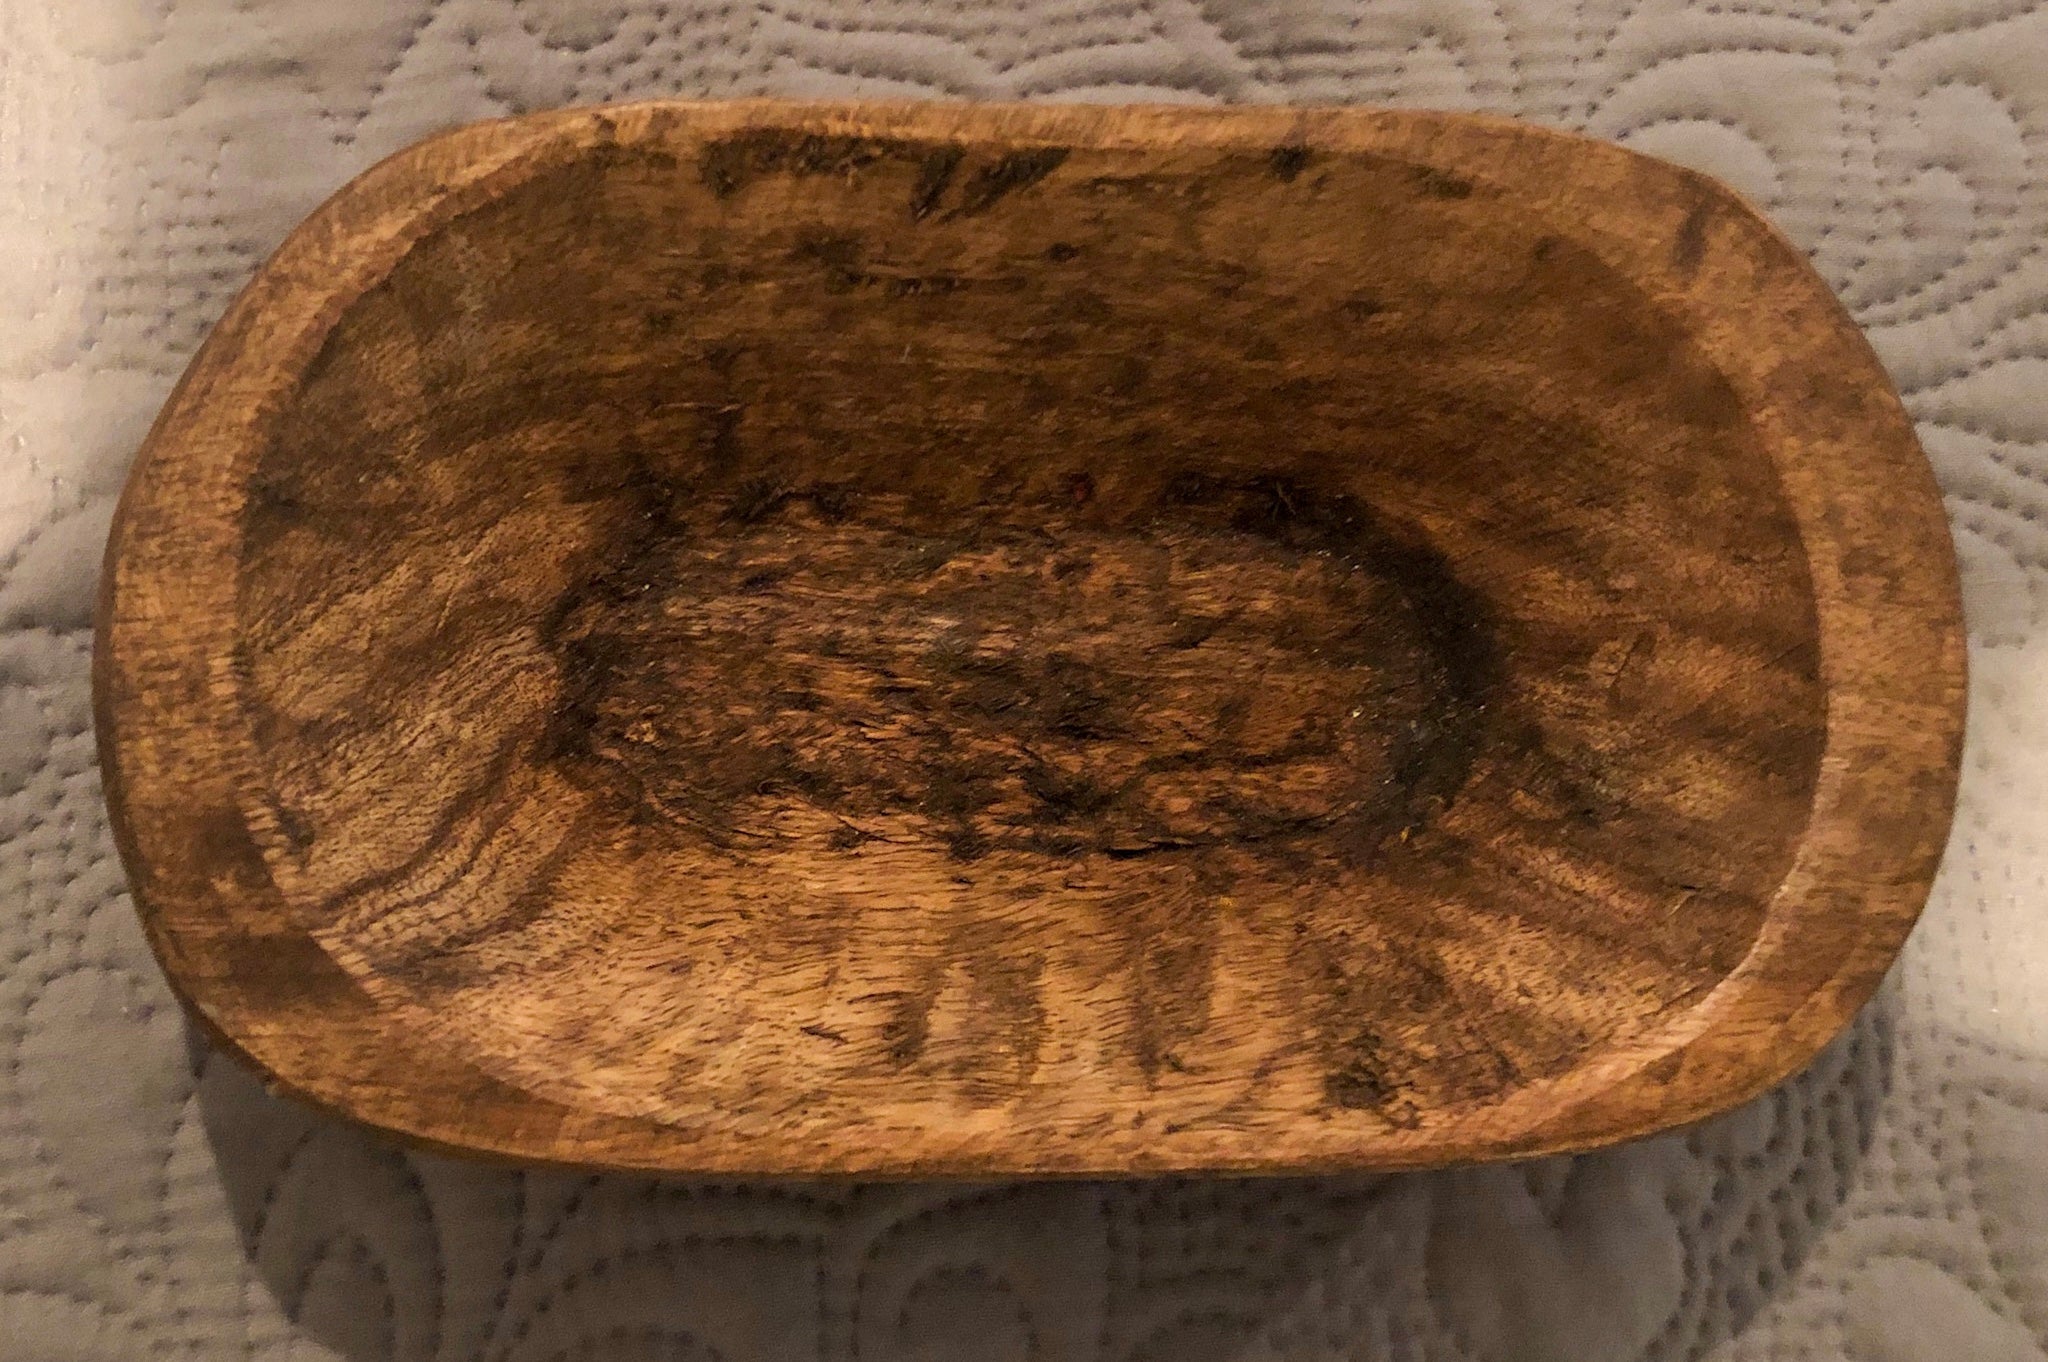 IMPERFECT Dough Bowl Small – Woodfire Candle Co